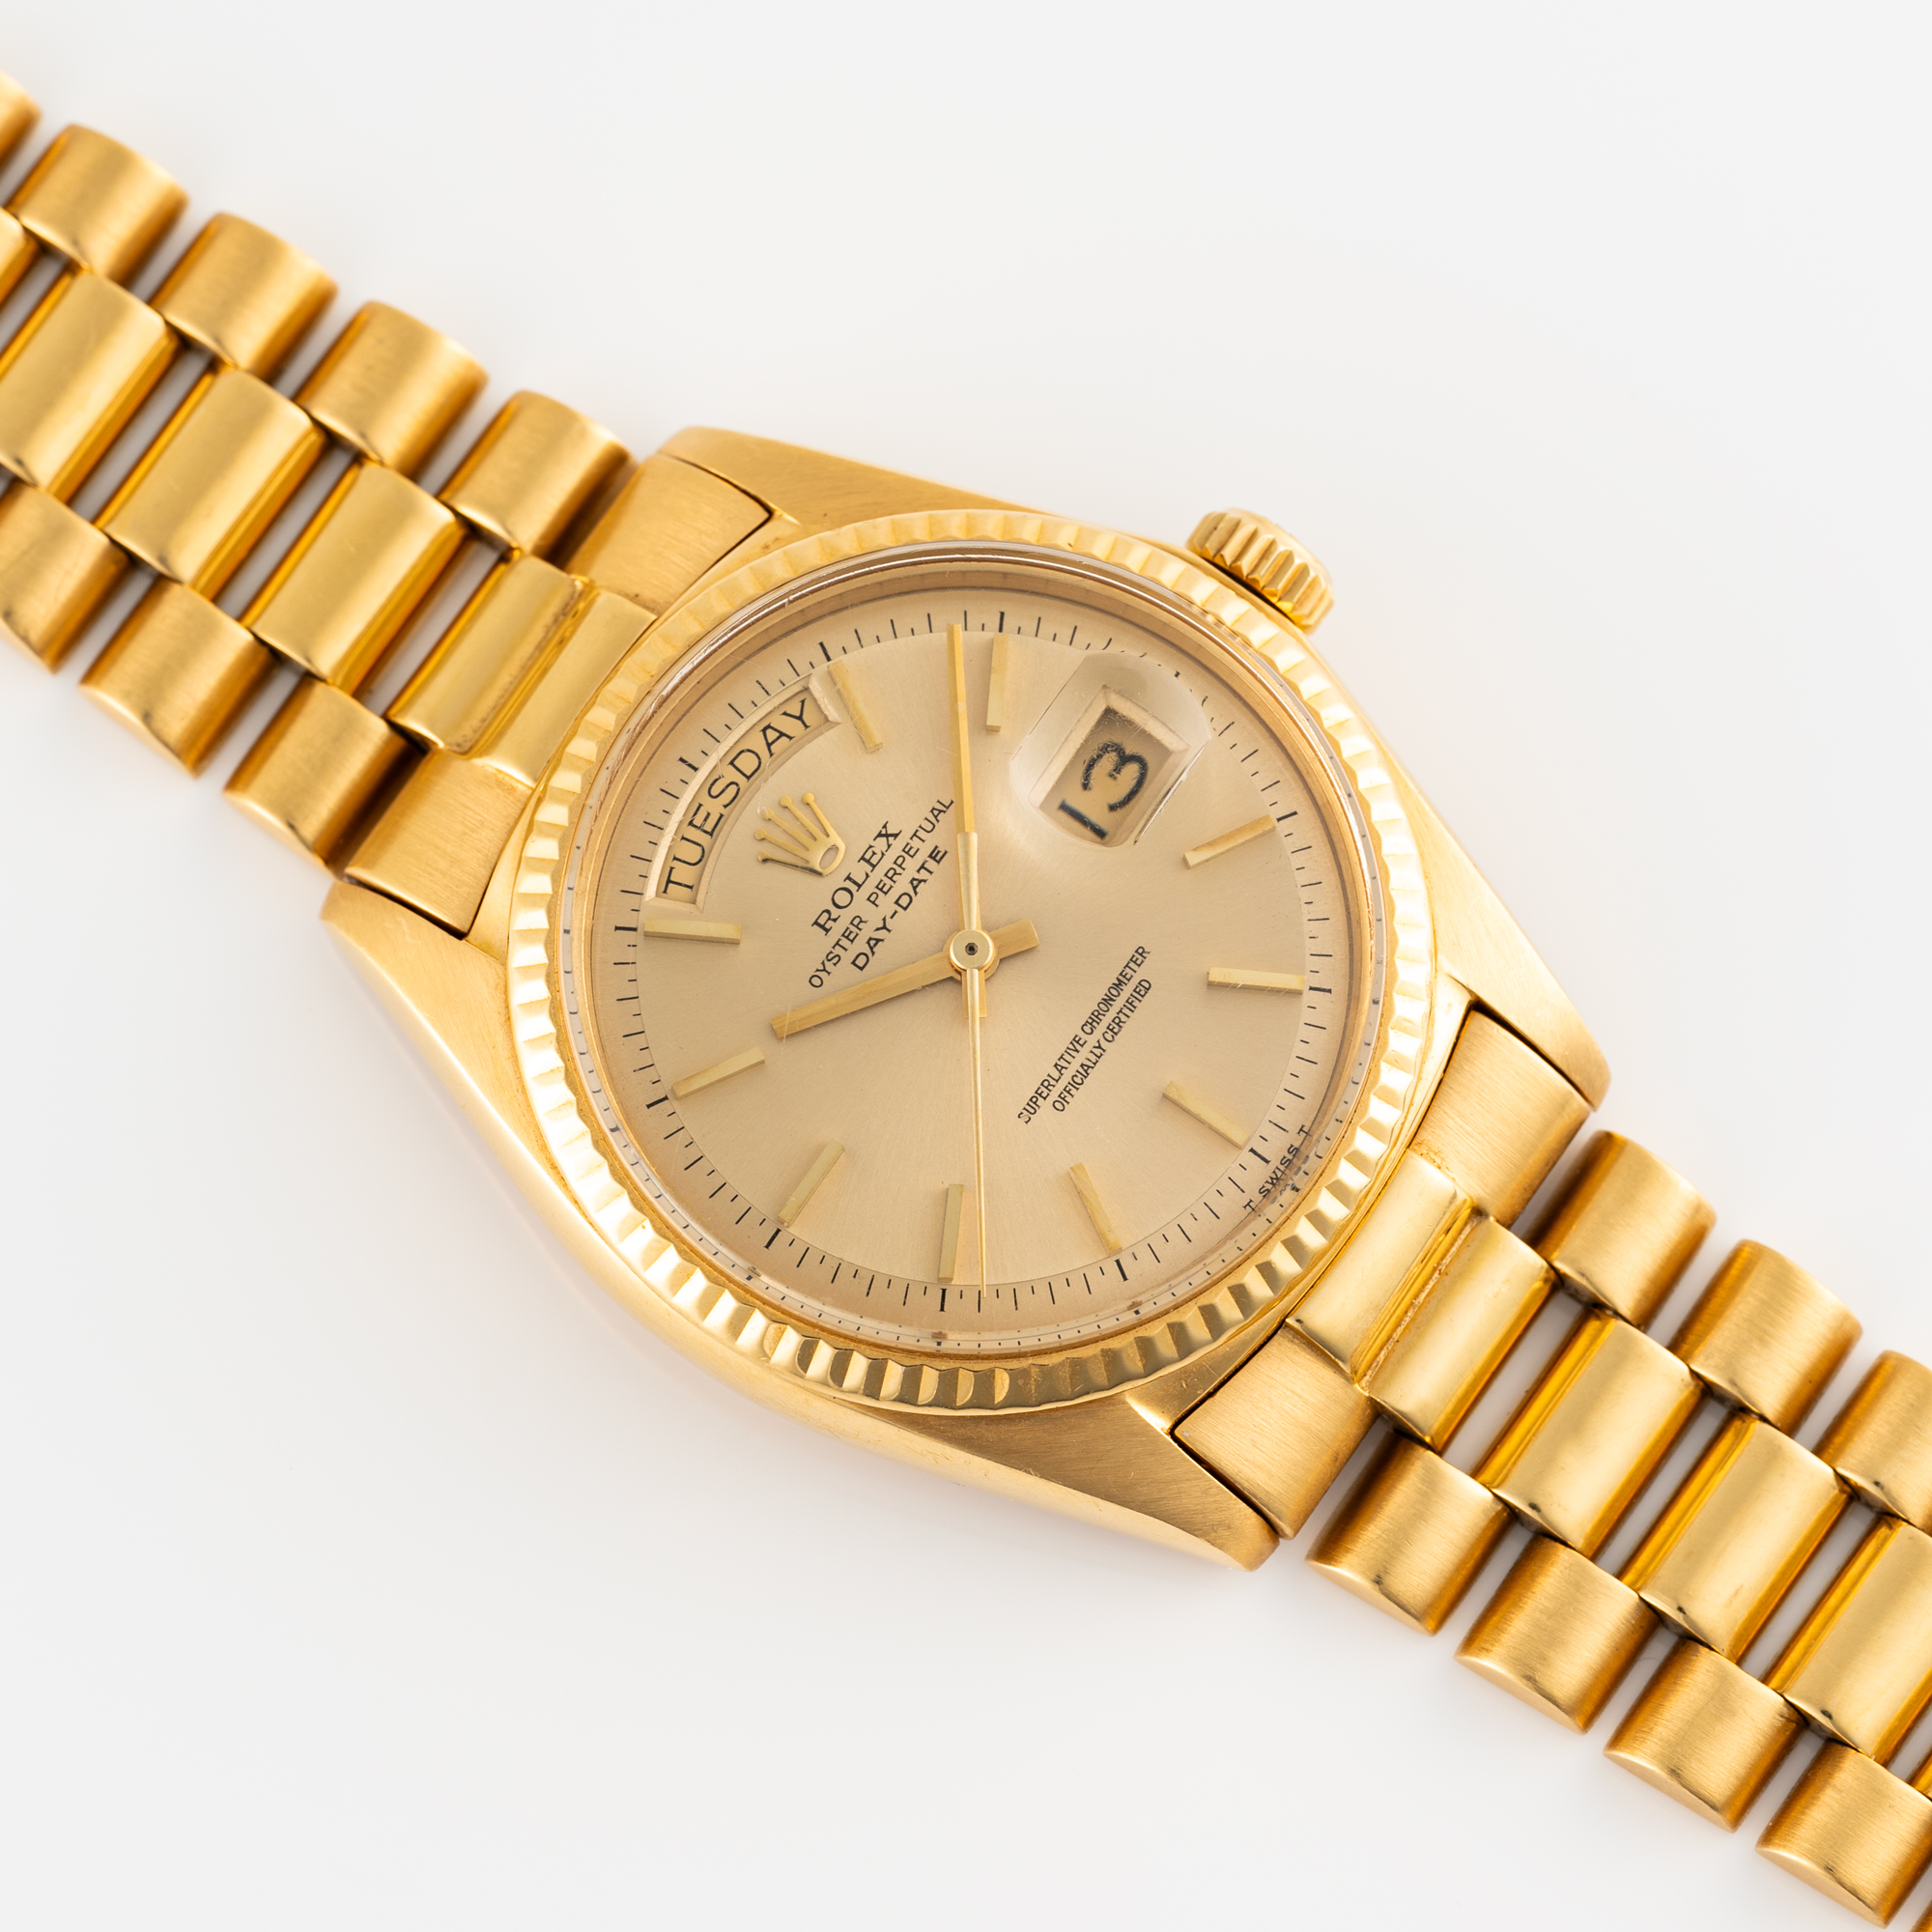 A GENTLEMAN'S SIZE 18K SOLID YELLOW GOLD ROLEX OYSTER PERPETUAL DAY DATE BRACELET WATCH CIRCA - Image 4 of 9